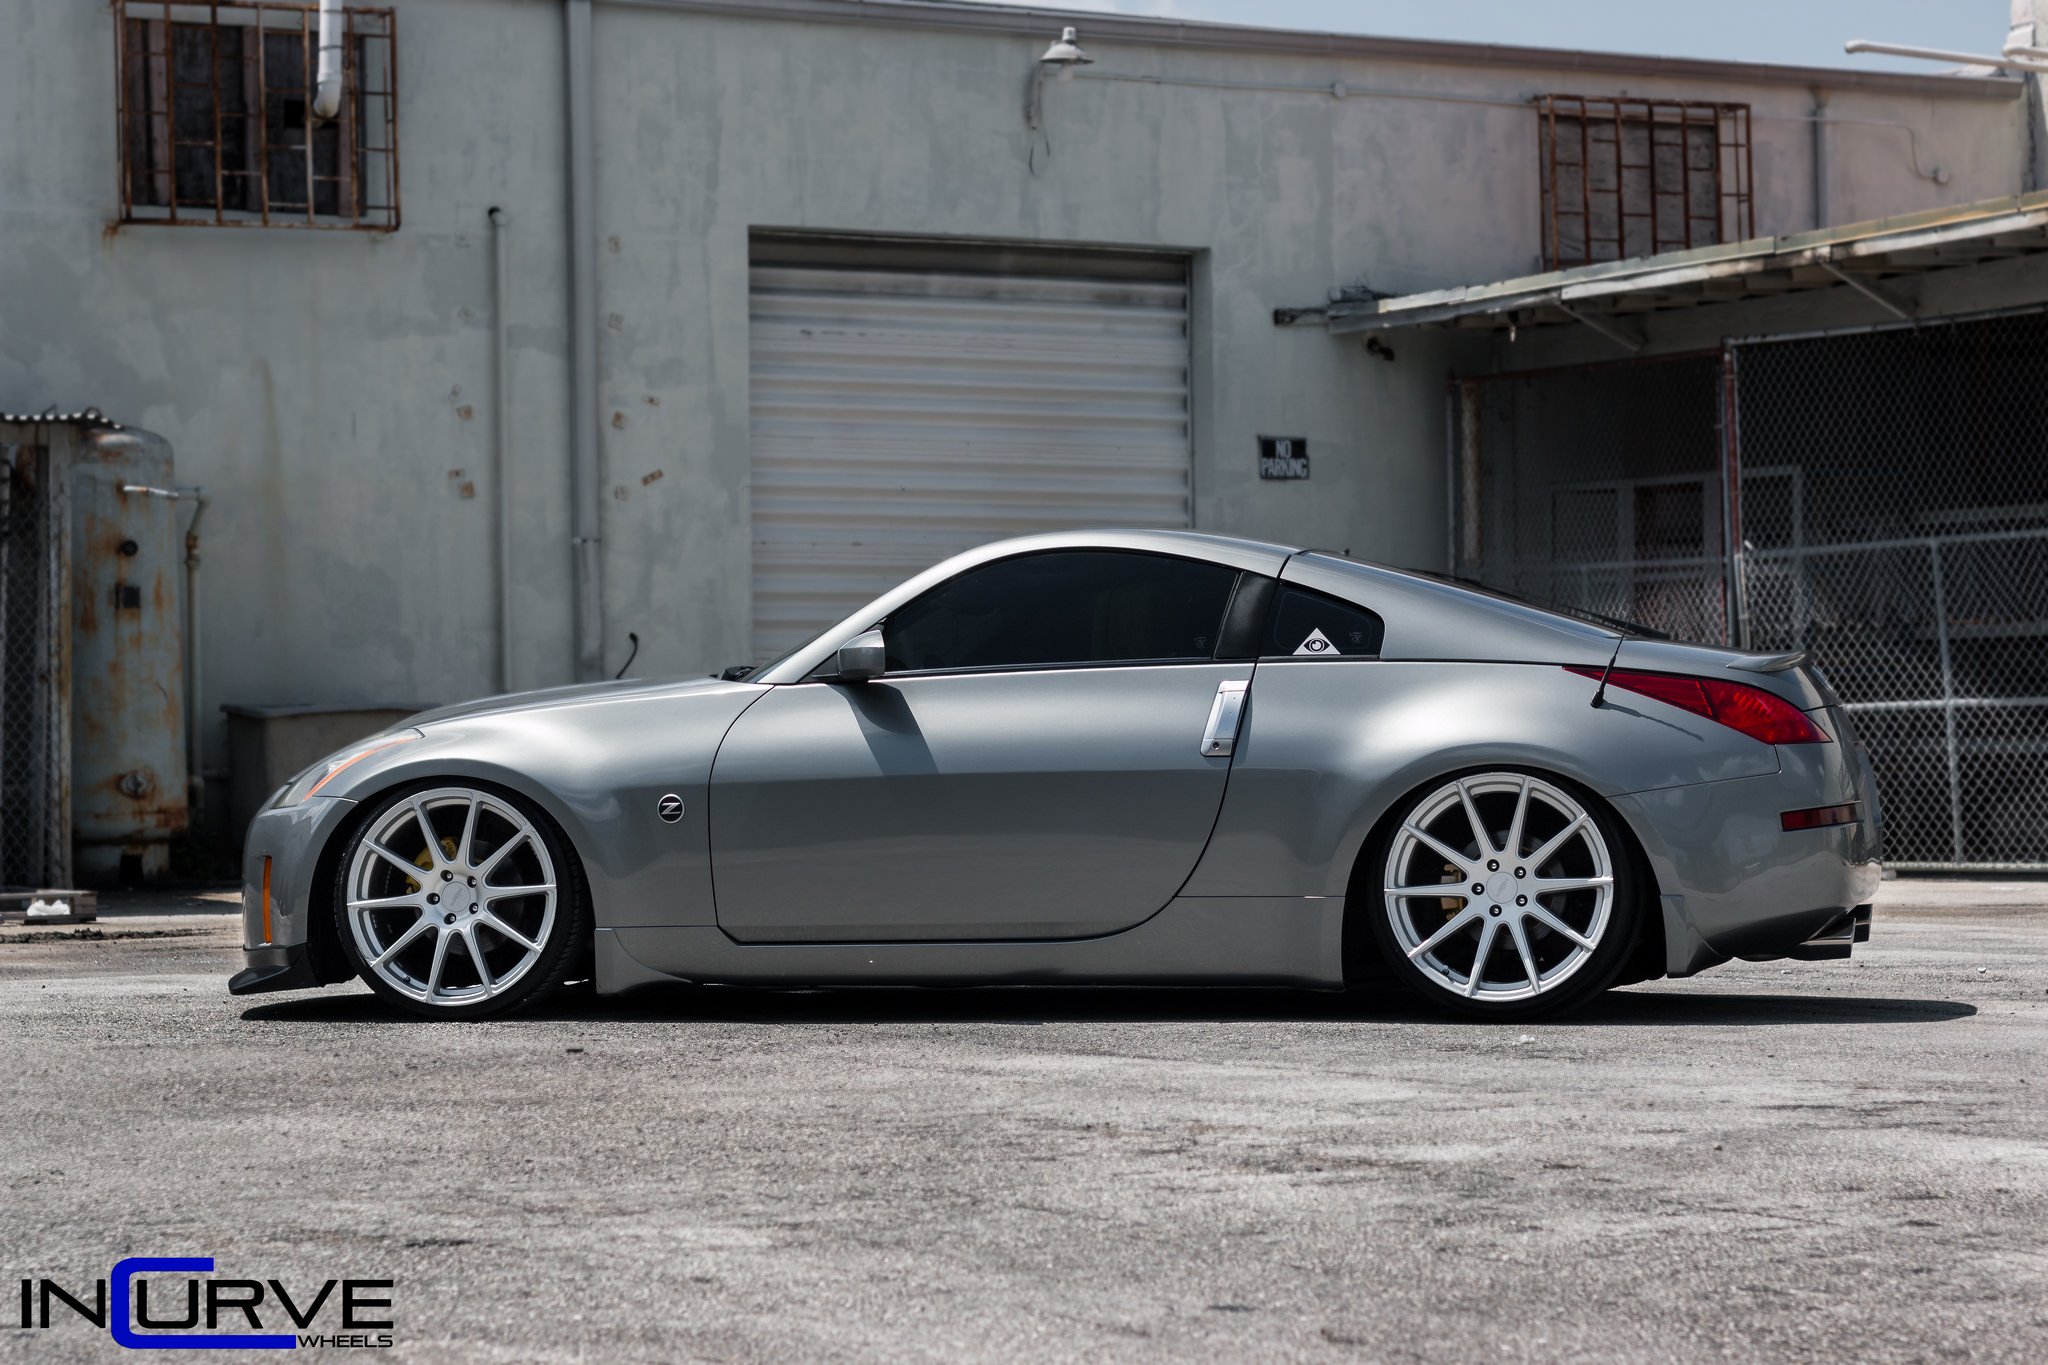 2015, Incurve, Wheels, Cars, Tuning, 350z, Nissan Wallpaper